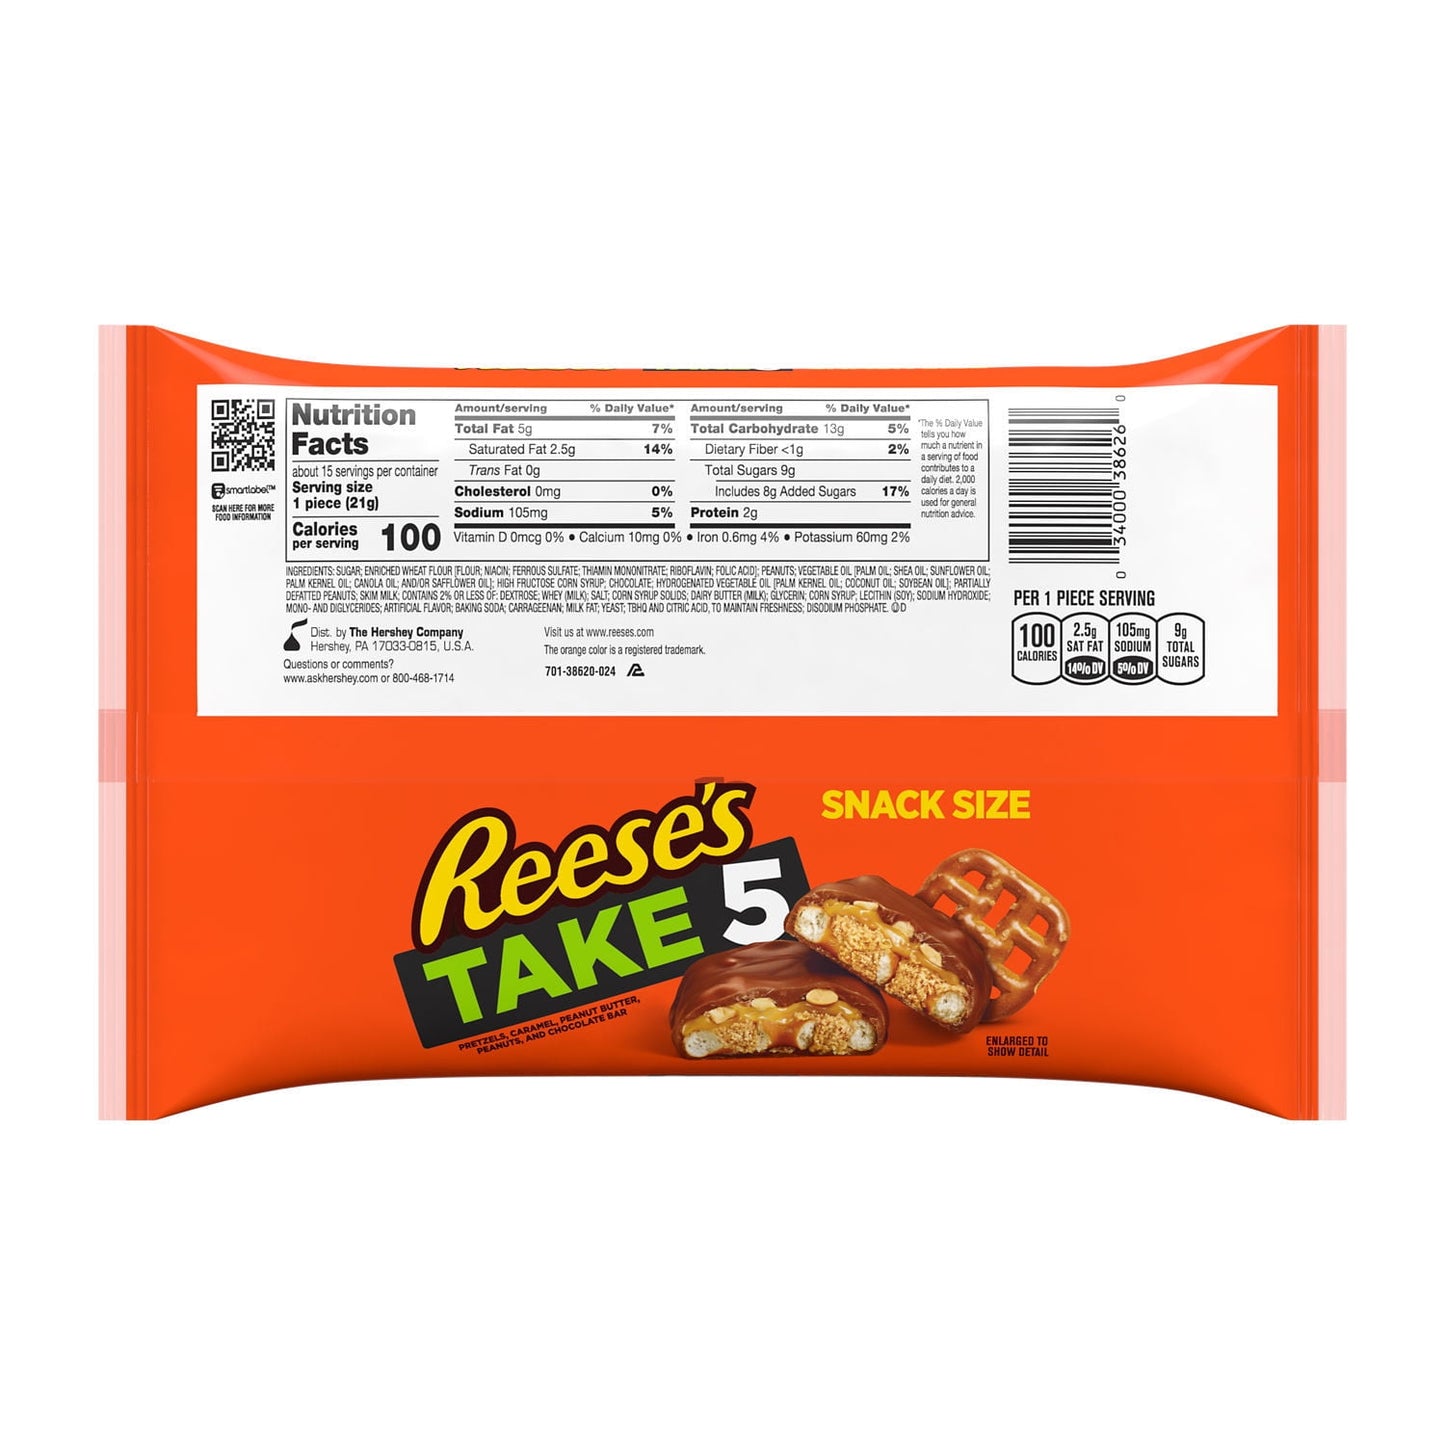 Reese's Take 5 Pretzel, Peanut and Chocolate Snack Size Candy, Bag 11.25 oz